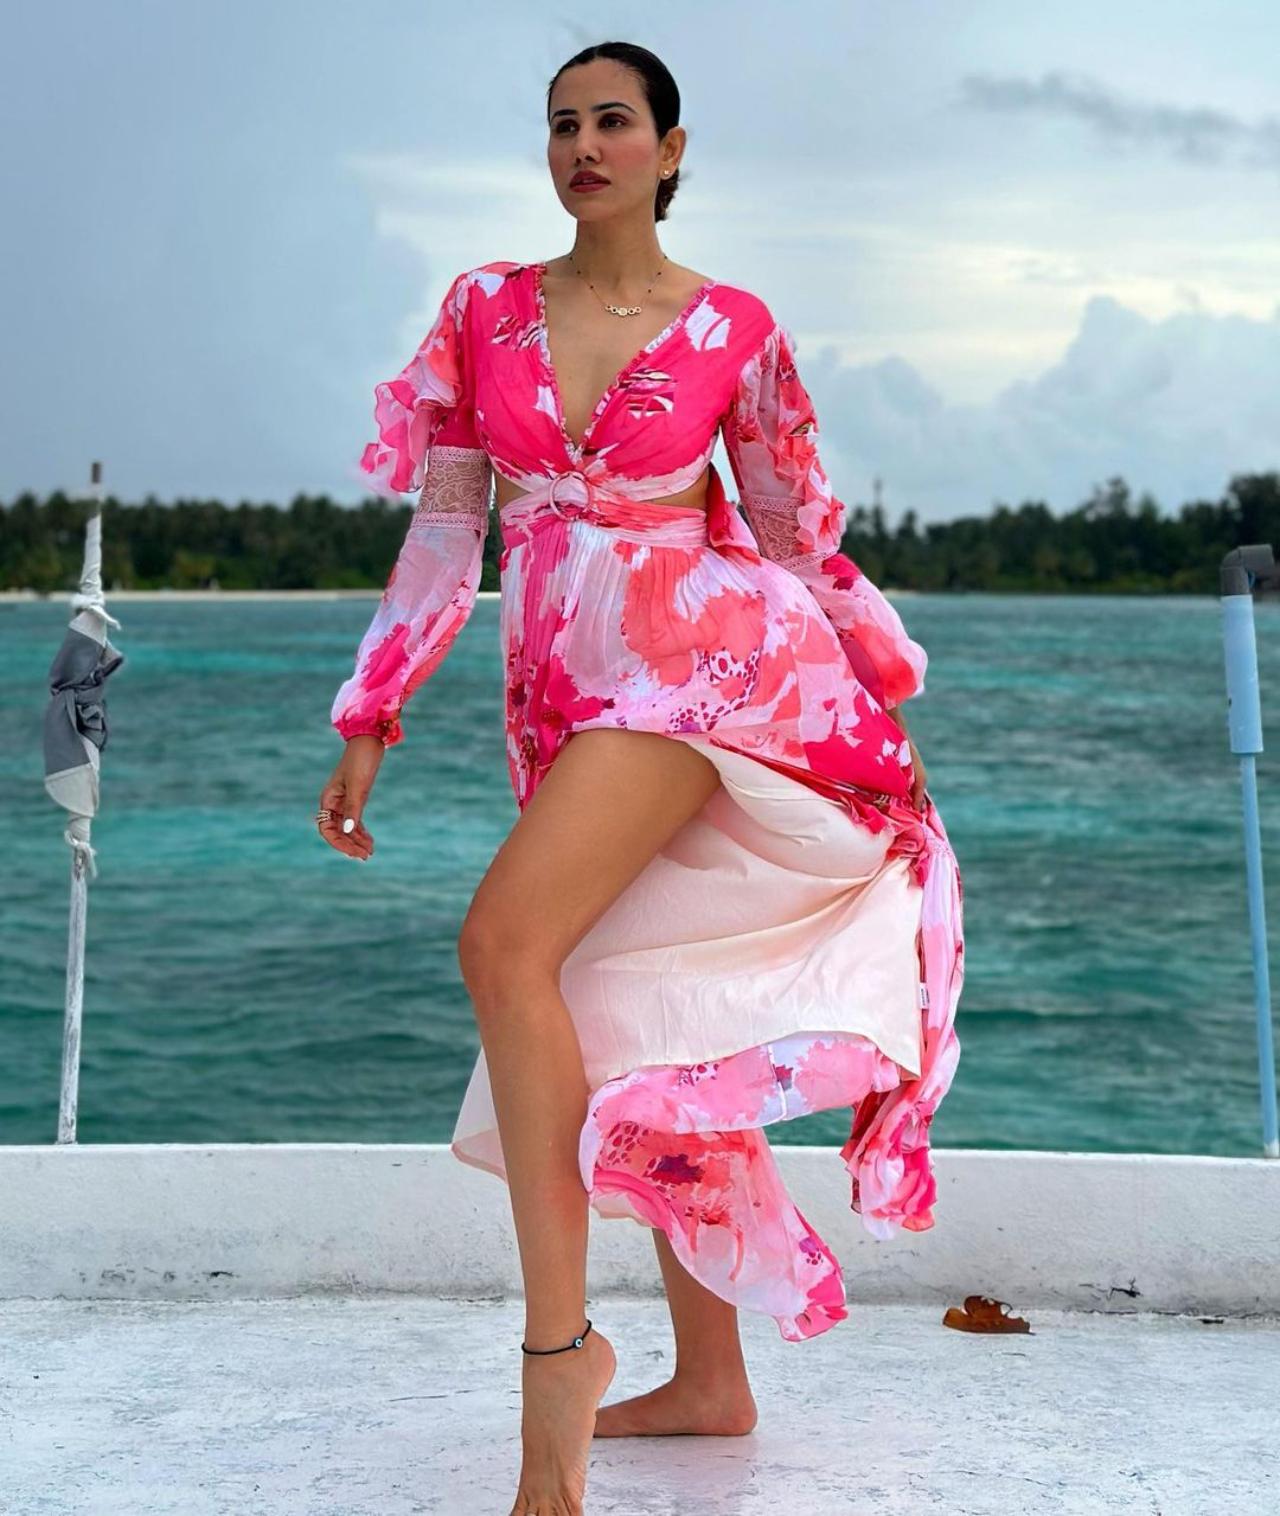 The Sonu ke Titu ki Sweety star flaunted her outfit, lifted by the Maldives breeze. The dress had small cut-outs at the waist held together by a sash and boasted a high slit. Don’t forget her evil-eye anklet!